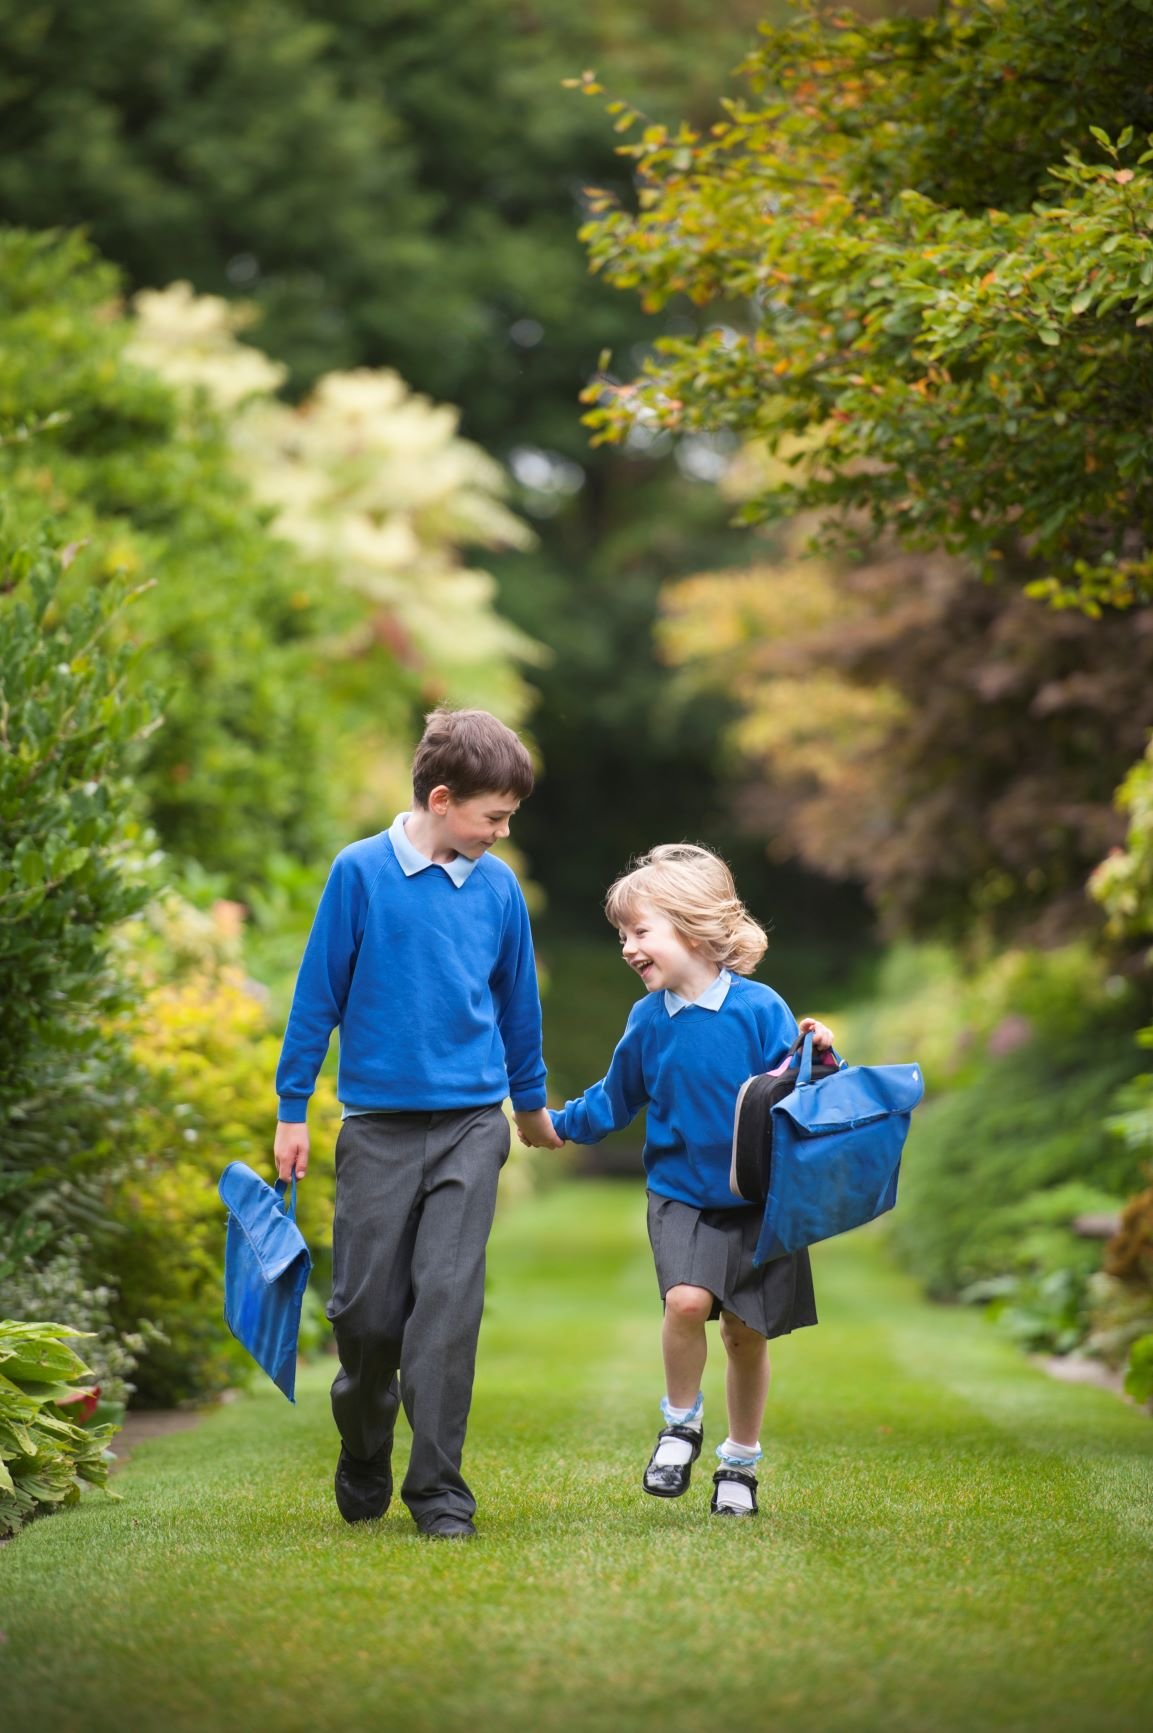 Back to school photo - brother and sister walking to school